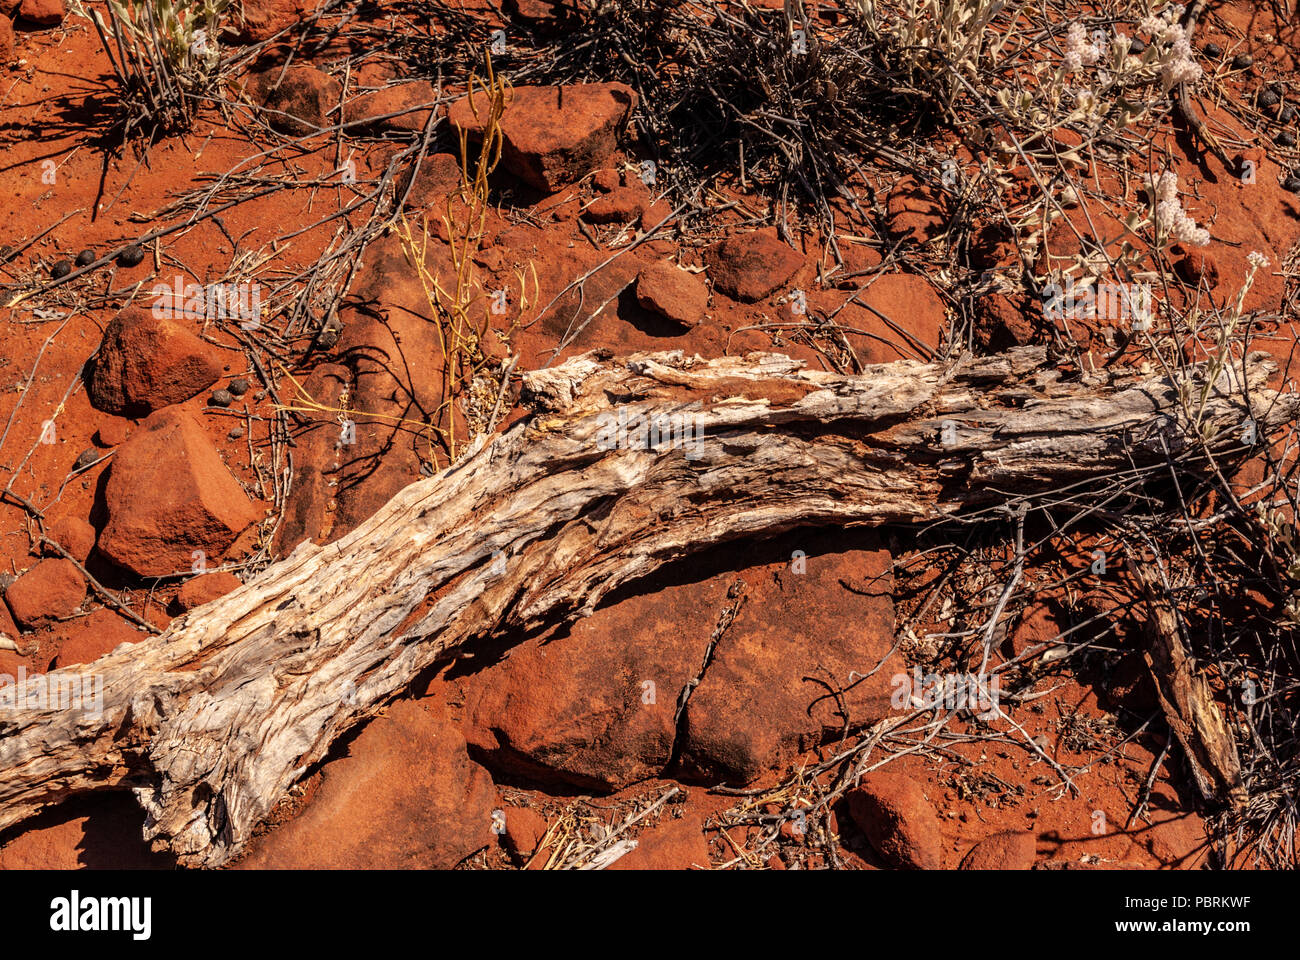 Palm Valley, Finke Gorge National Park in Northern Territory, Australia Stock Photo